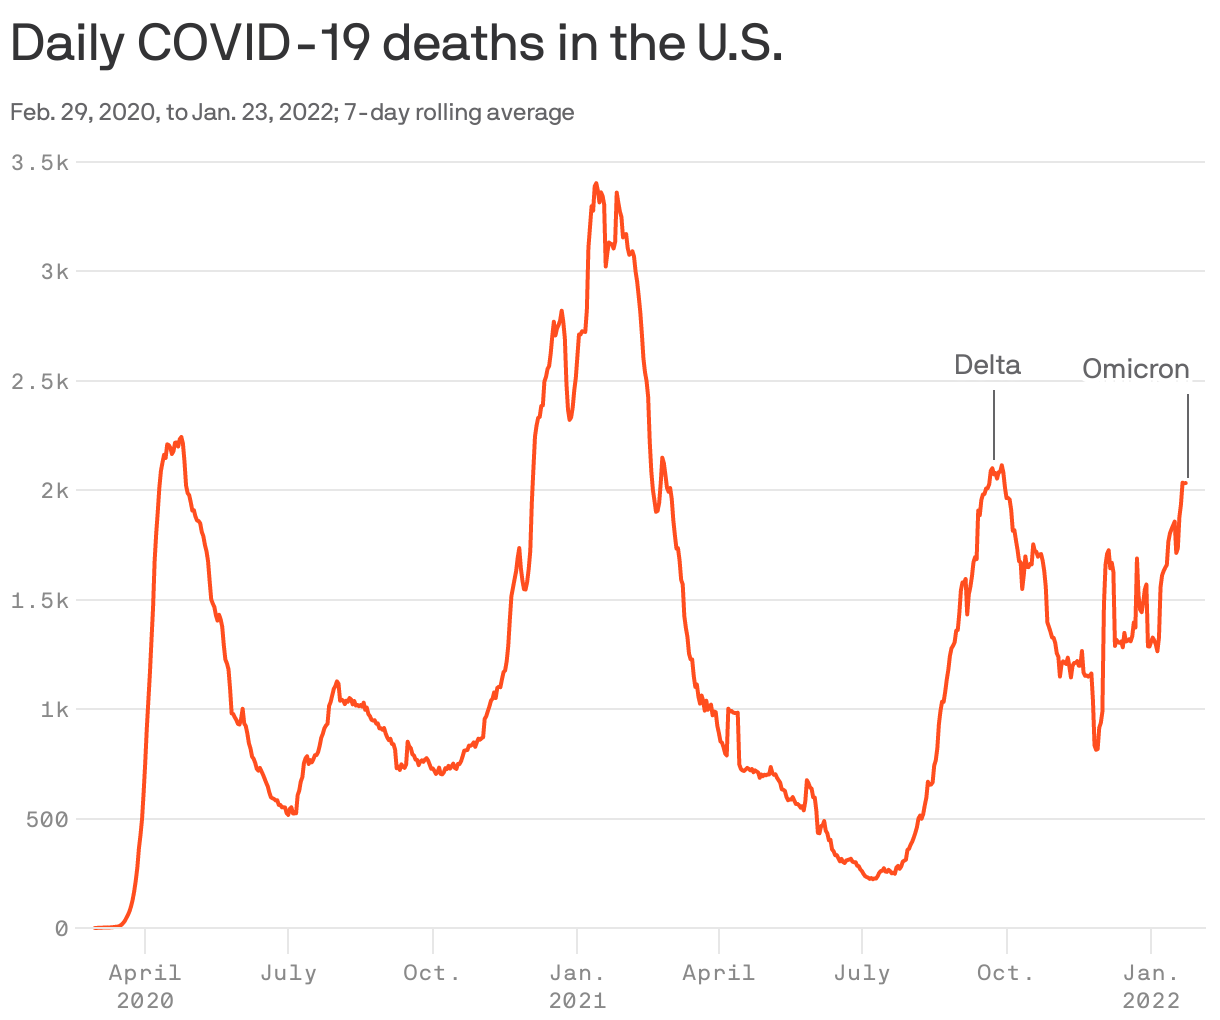 Daily COVID-19 deaths in the U.S.